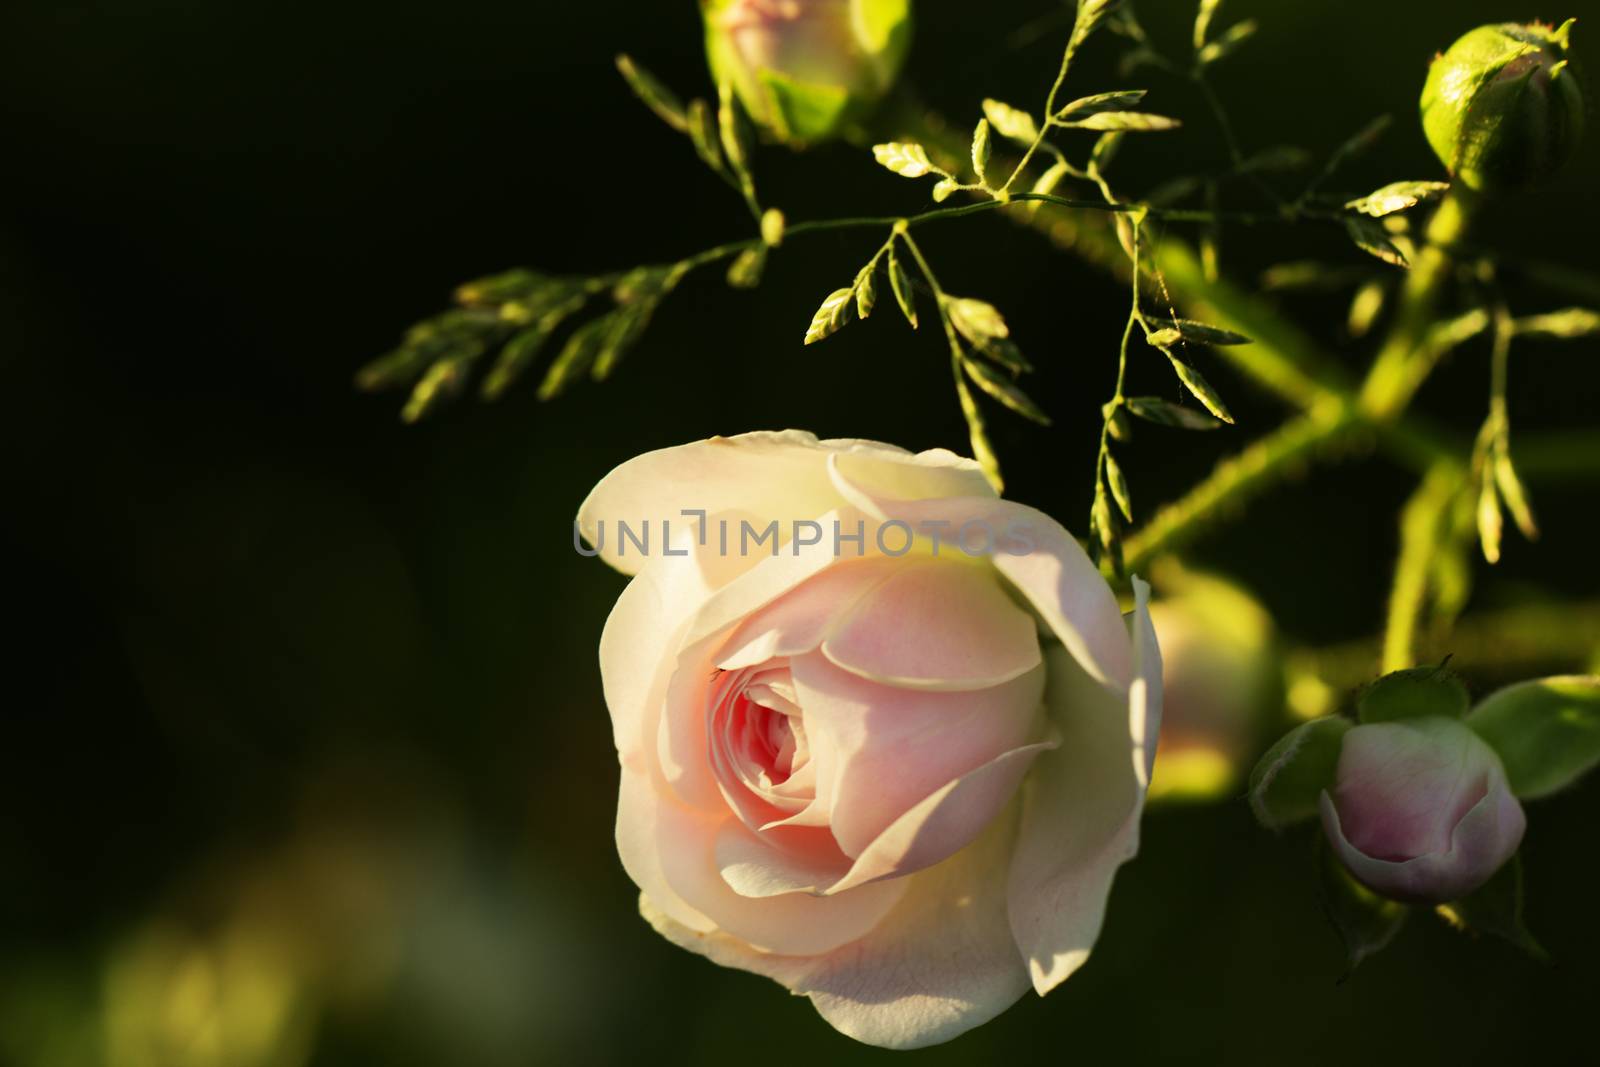 Close-up of a dog rose (wild rose), Rosa canina, with green leaves on a blurry background.